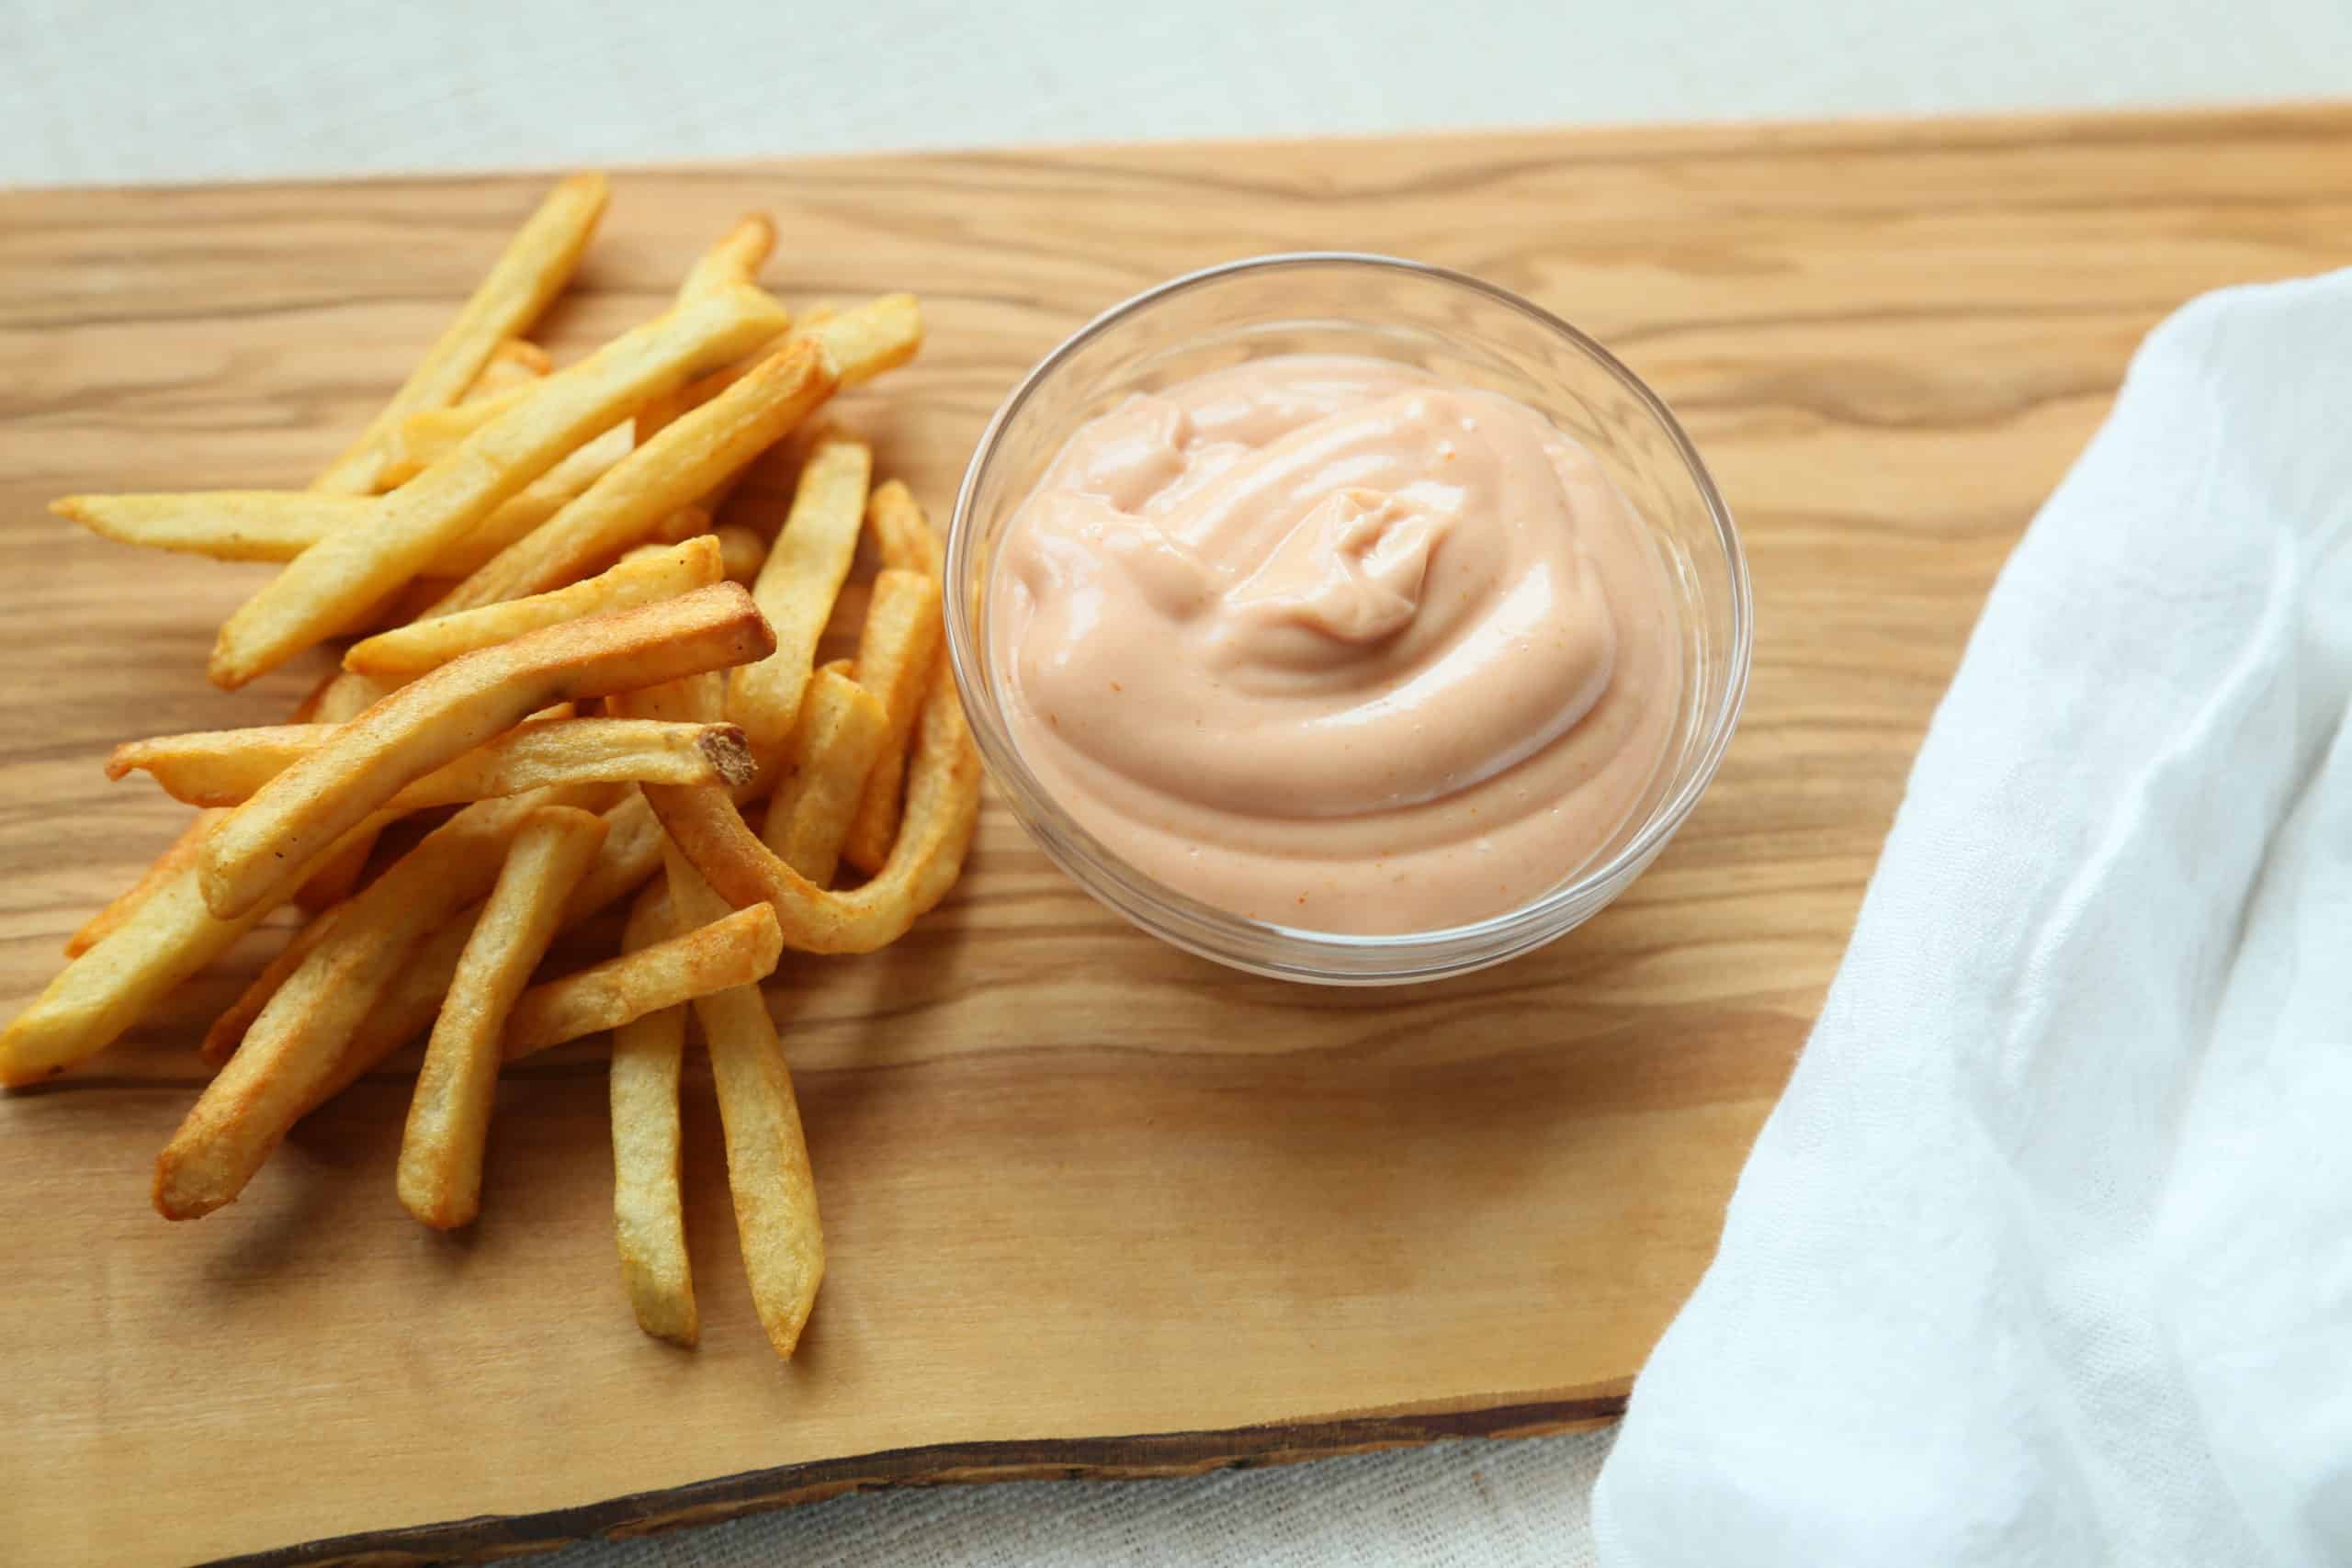 Mayo Ketchup Sauce - From Michigan To The Table